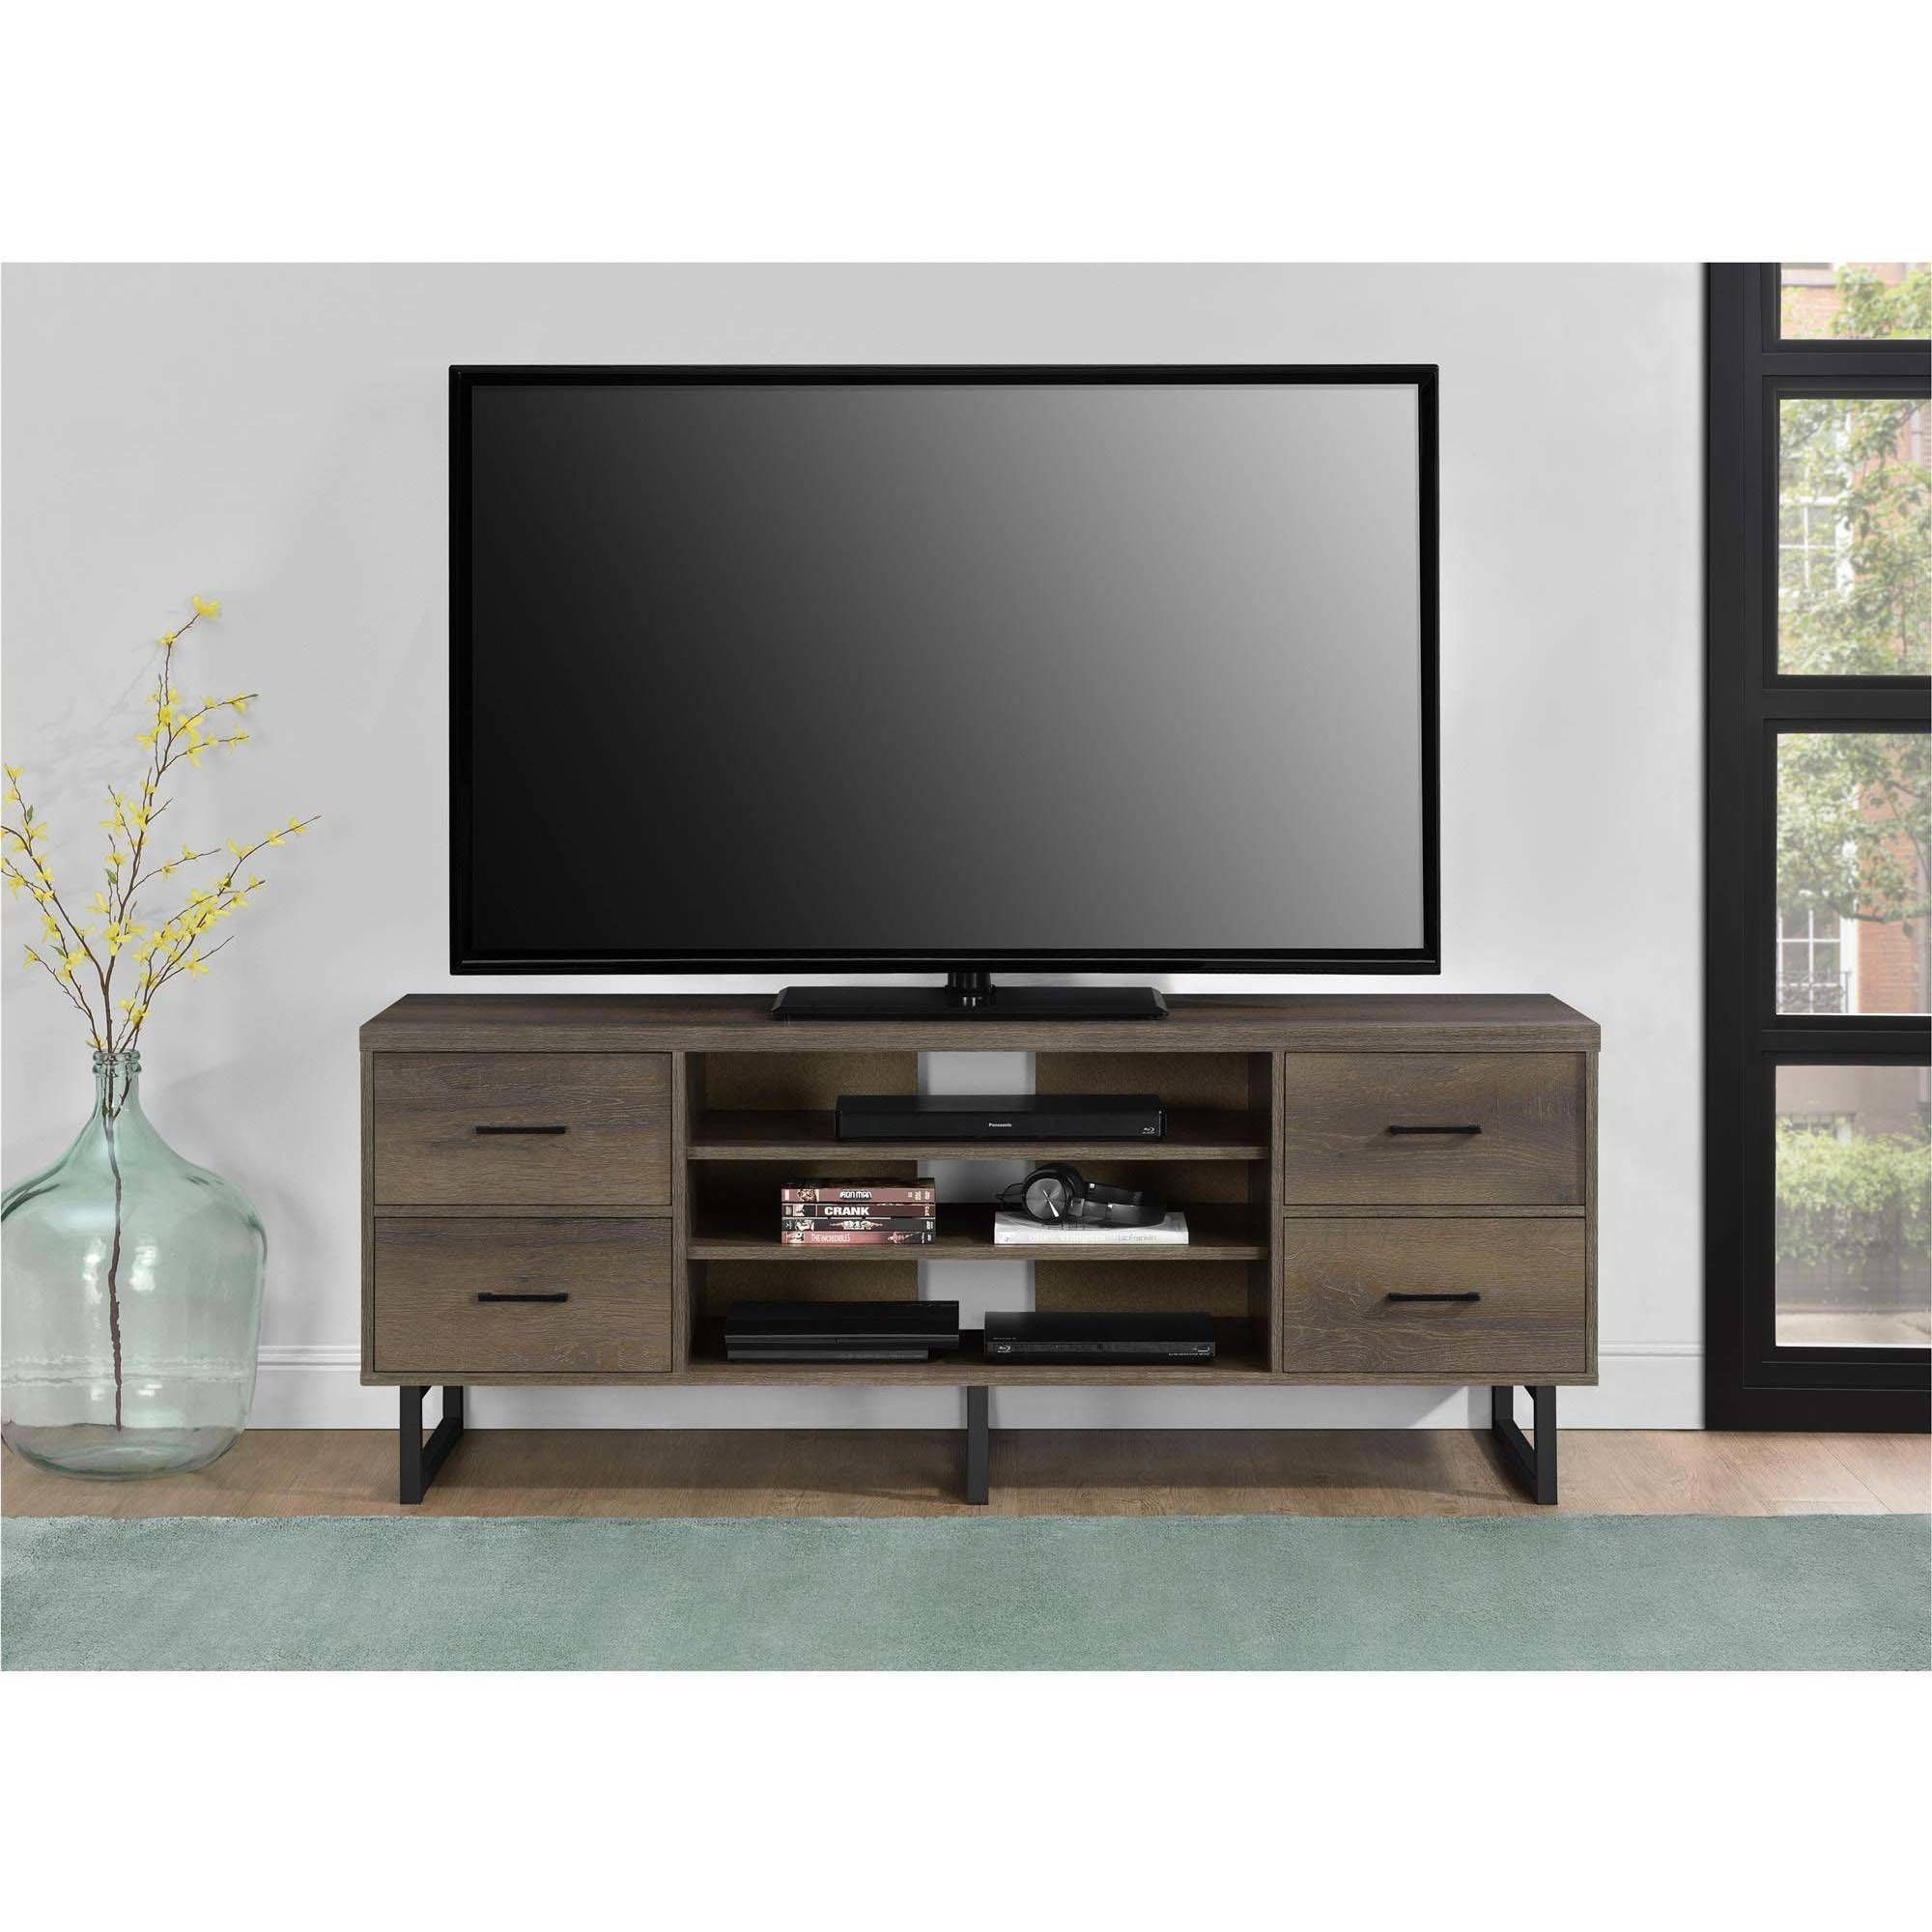 Ameriwood Home Candon Tv Stand With Bins For Tvs Up To 60 Pertaining To Dillon Tv Stands Oak (View 12 of 15)